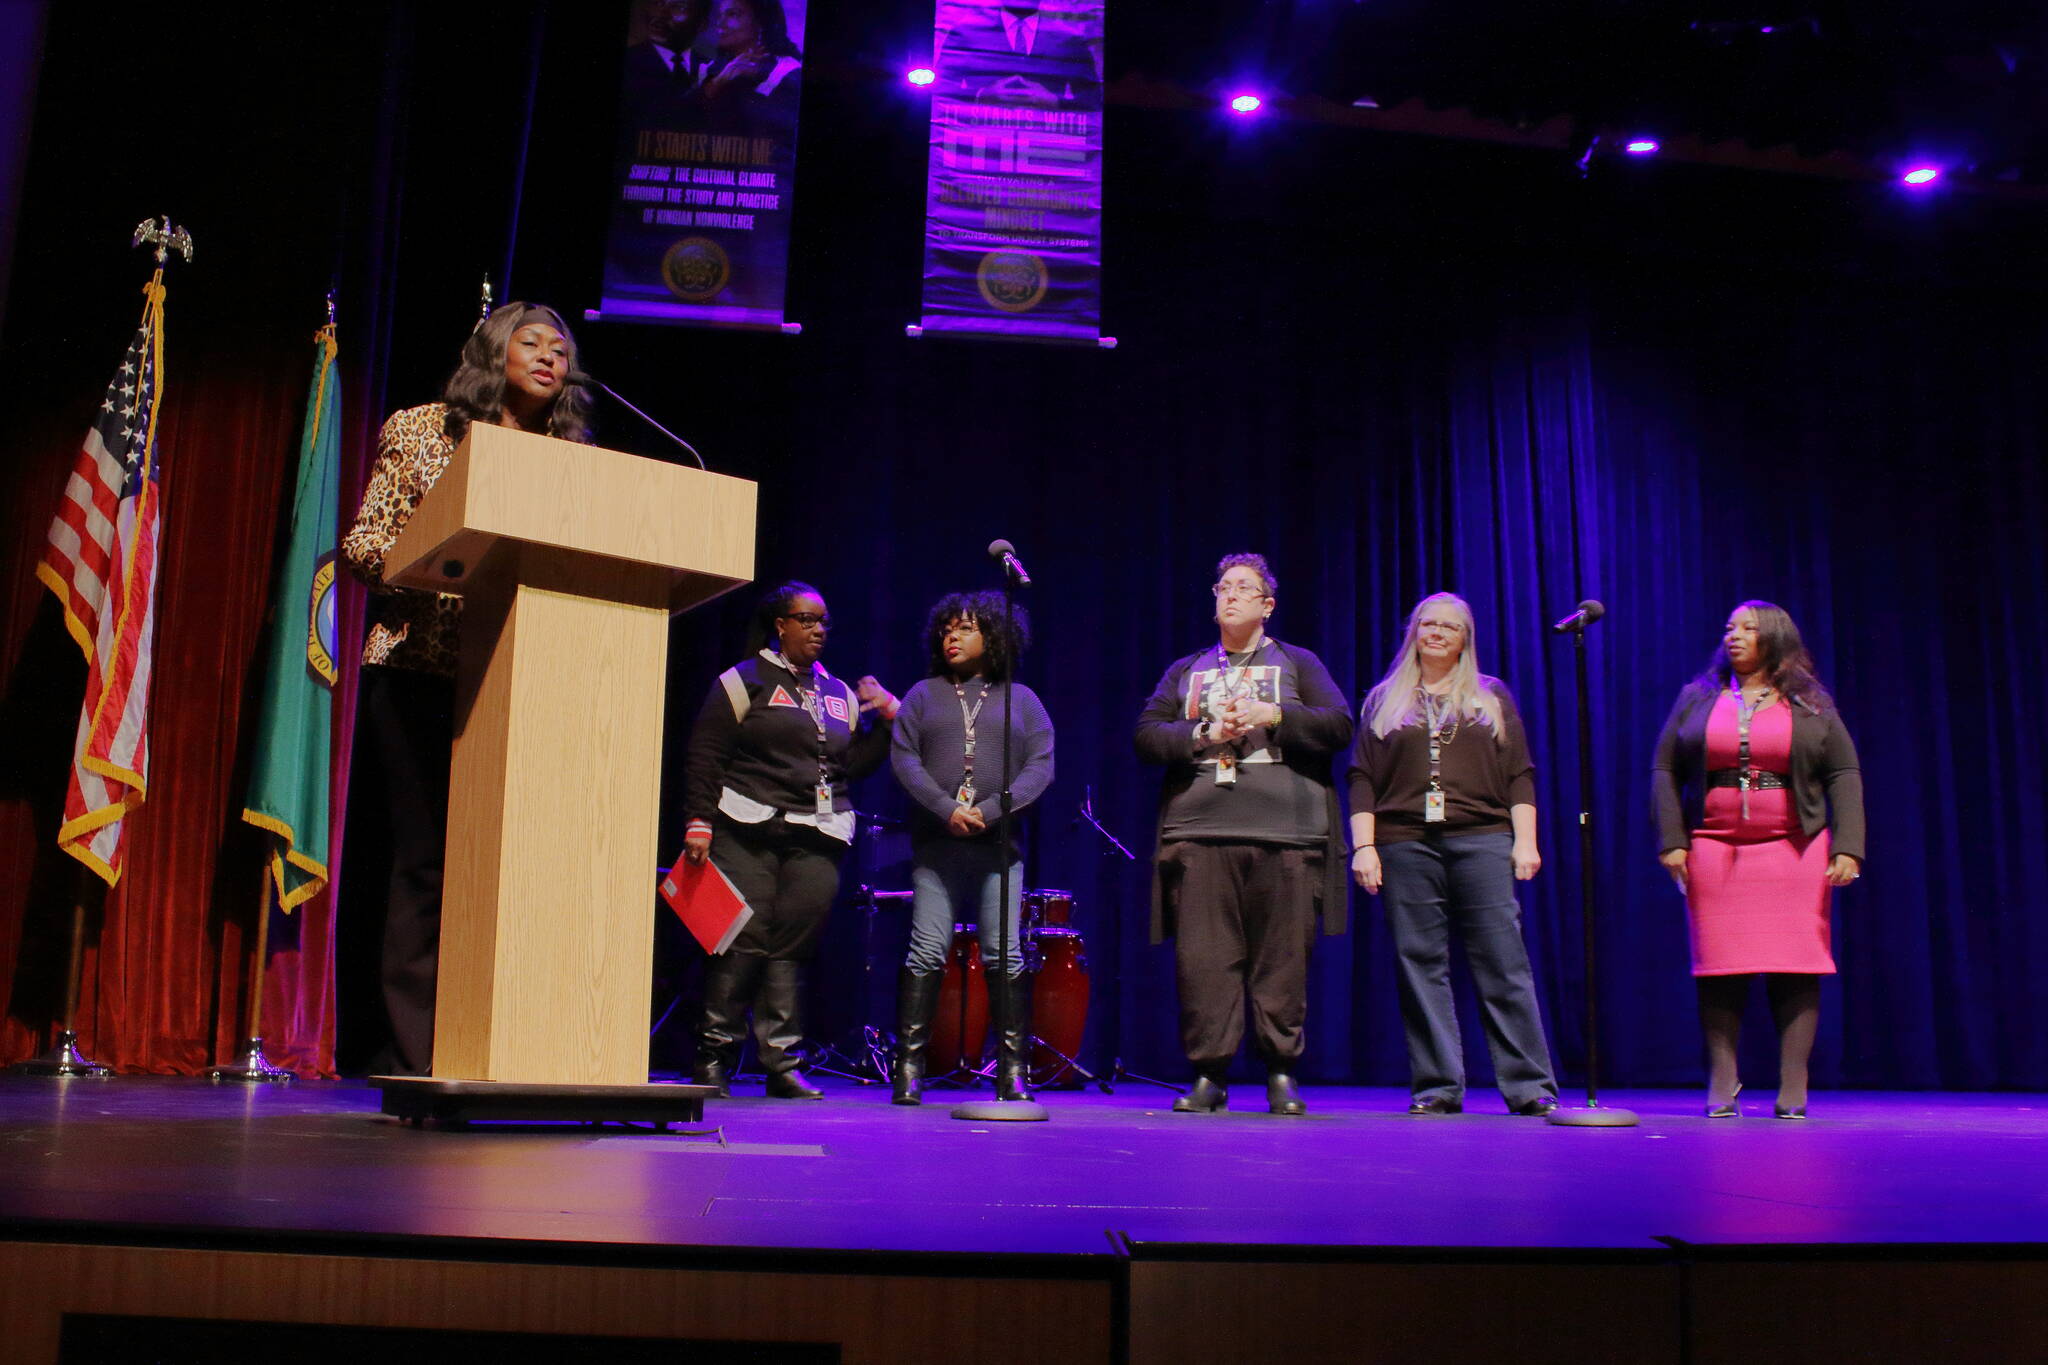 Photo by Keelin Everly-Lang / The Mirror
Each member of the Diversity Commission introduced themselves. They planned and hosted the MLK Day Celebration.